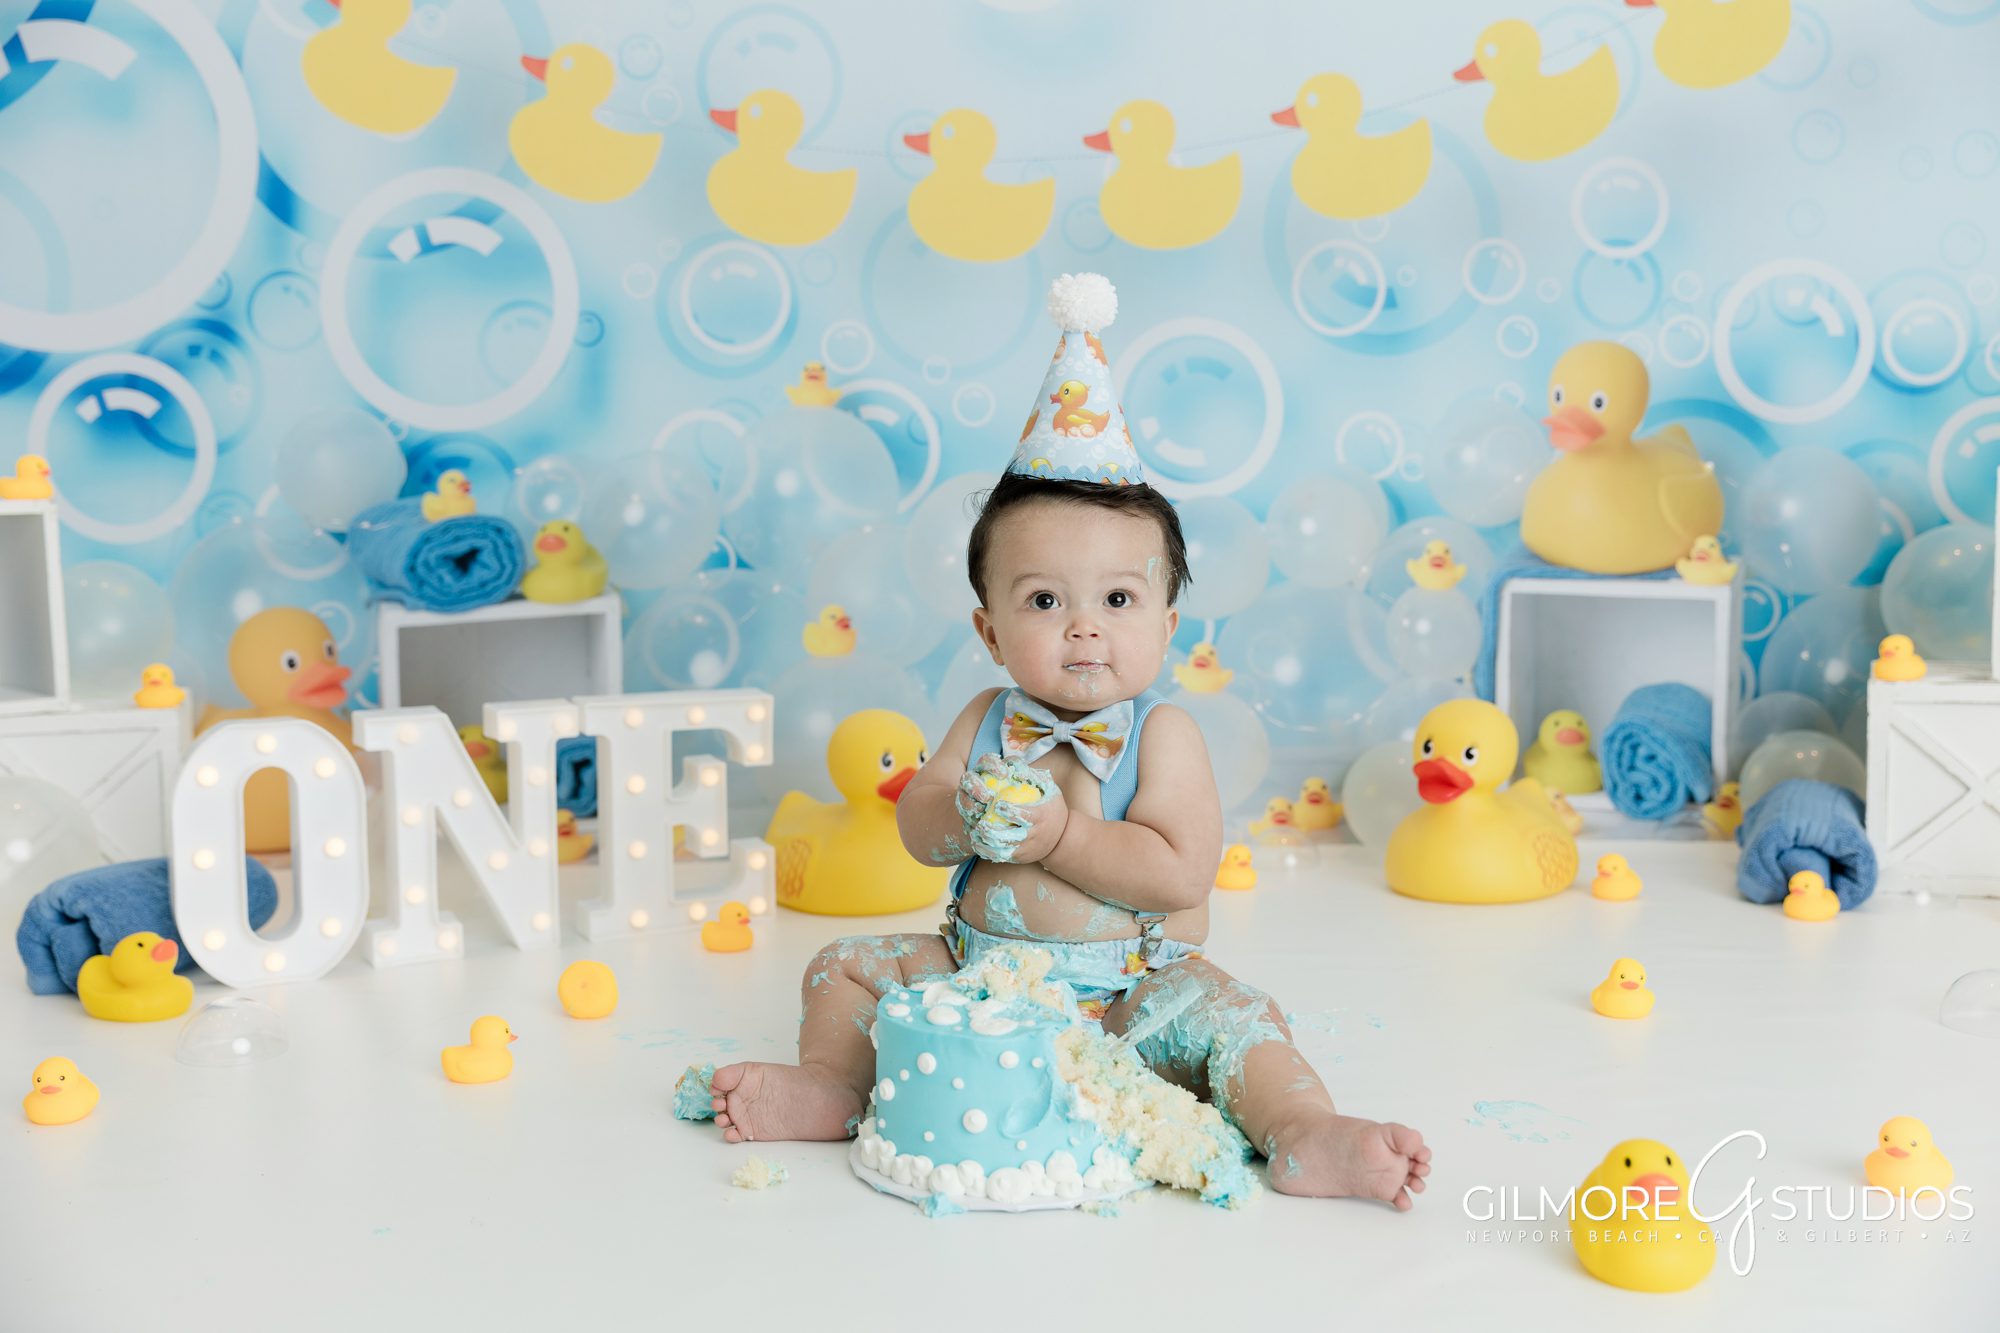 Rubber Ducky Cake Smash Photography Session, Gilbert Children's Photographer, Queen Creek Baby Photo Studio, Gilmore Studios, Yellow rubber ducky, bath, bubbles, set design, props, baby outfit, 1 year old, one year old boy, cake, bowtie, photo